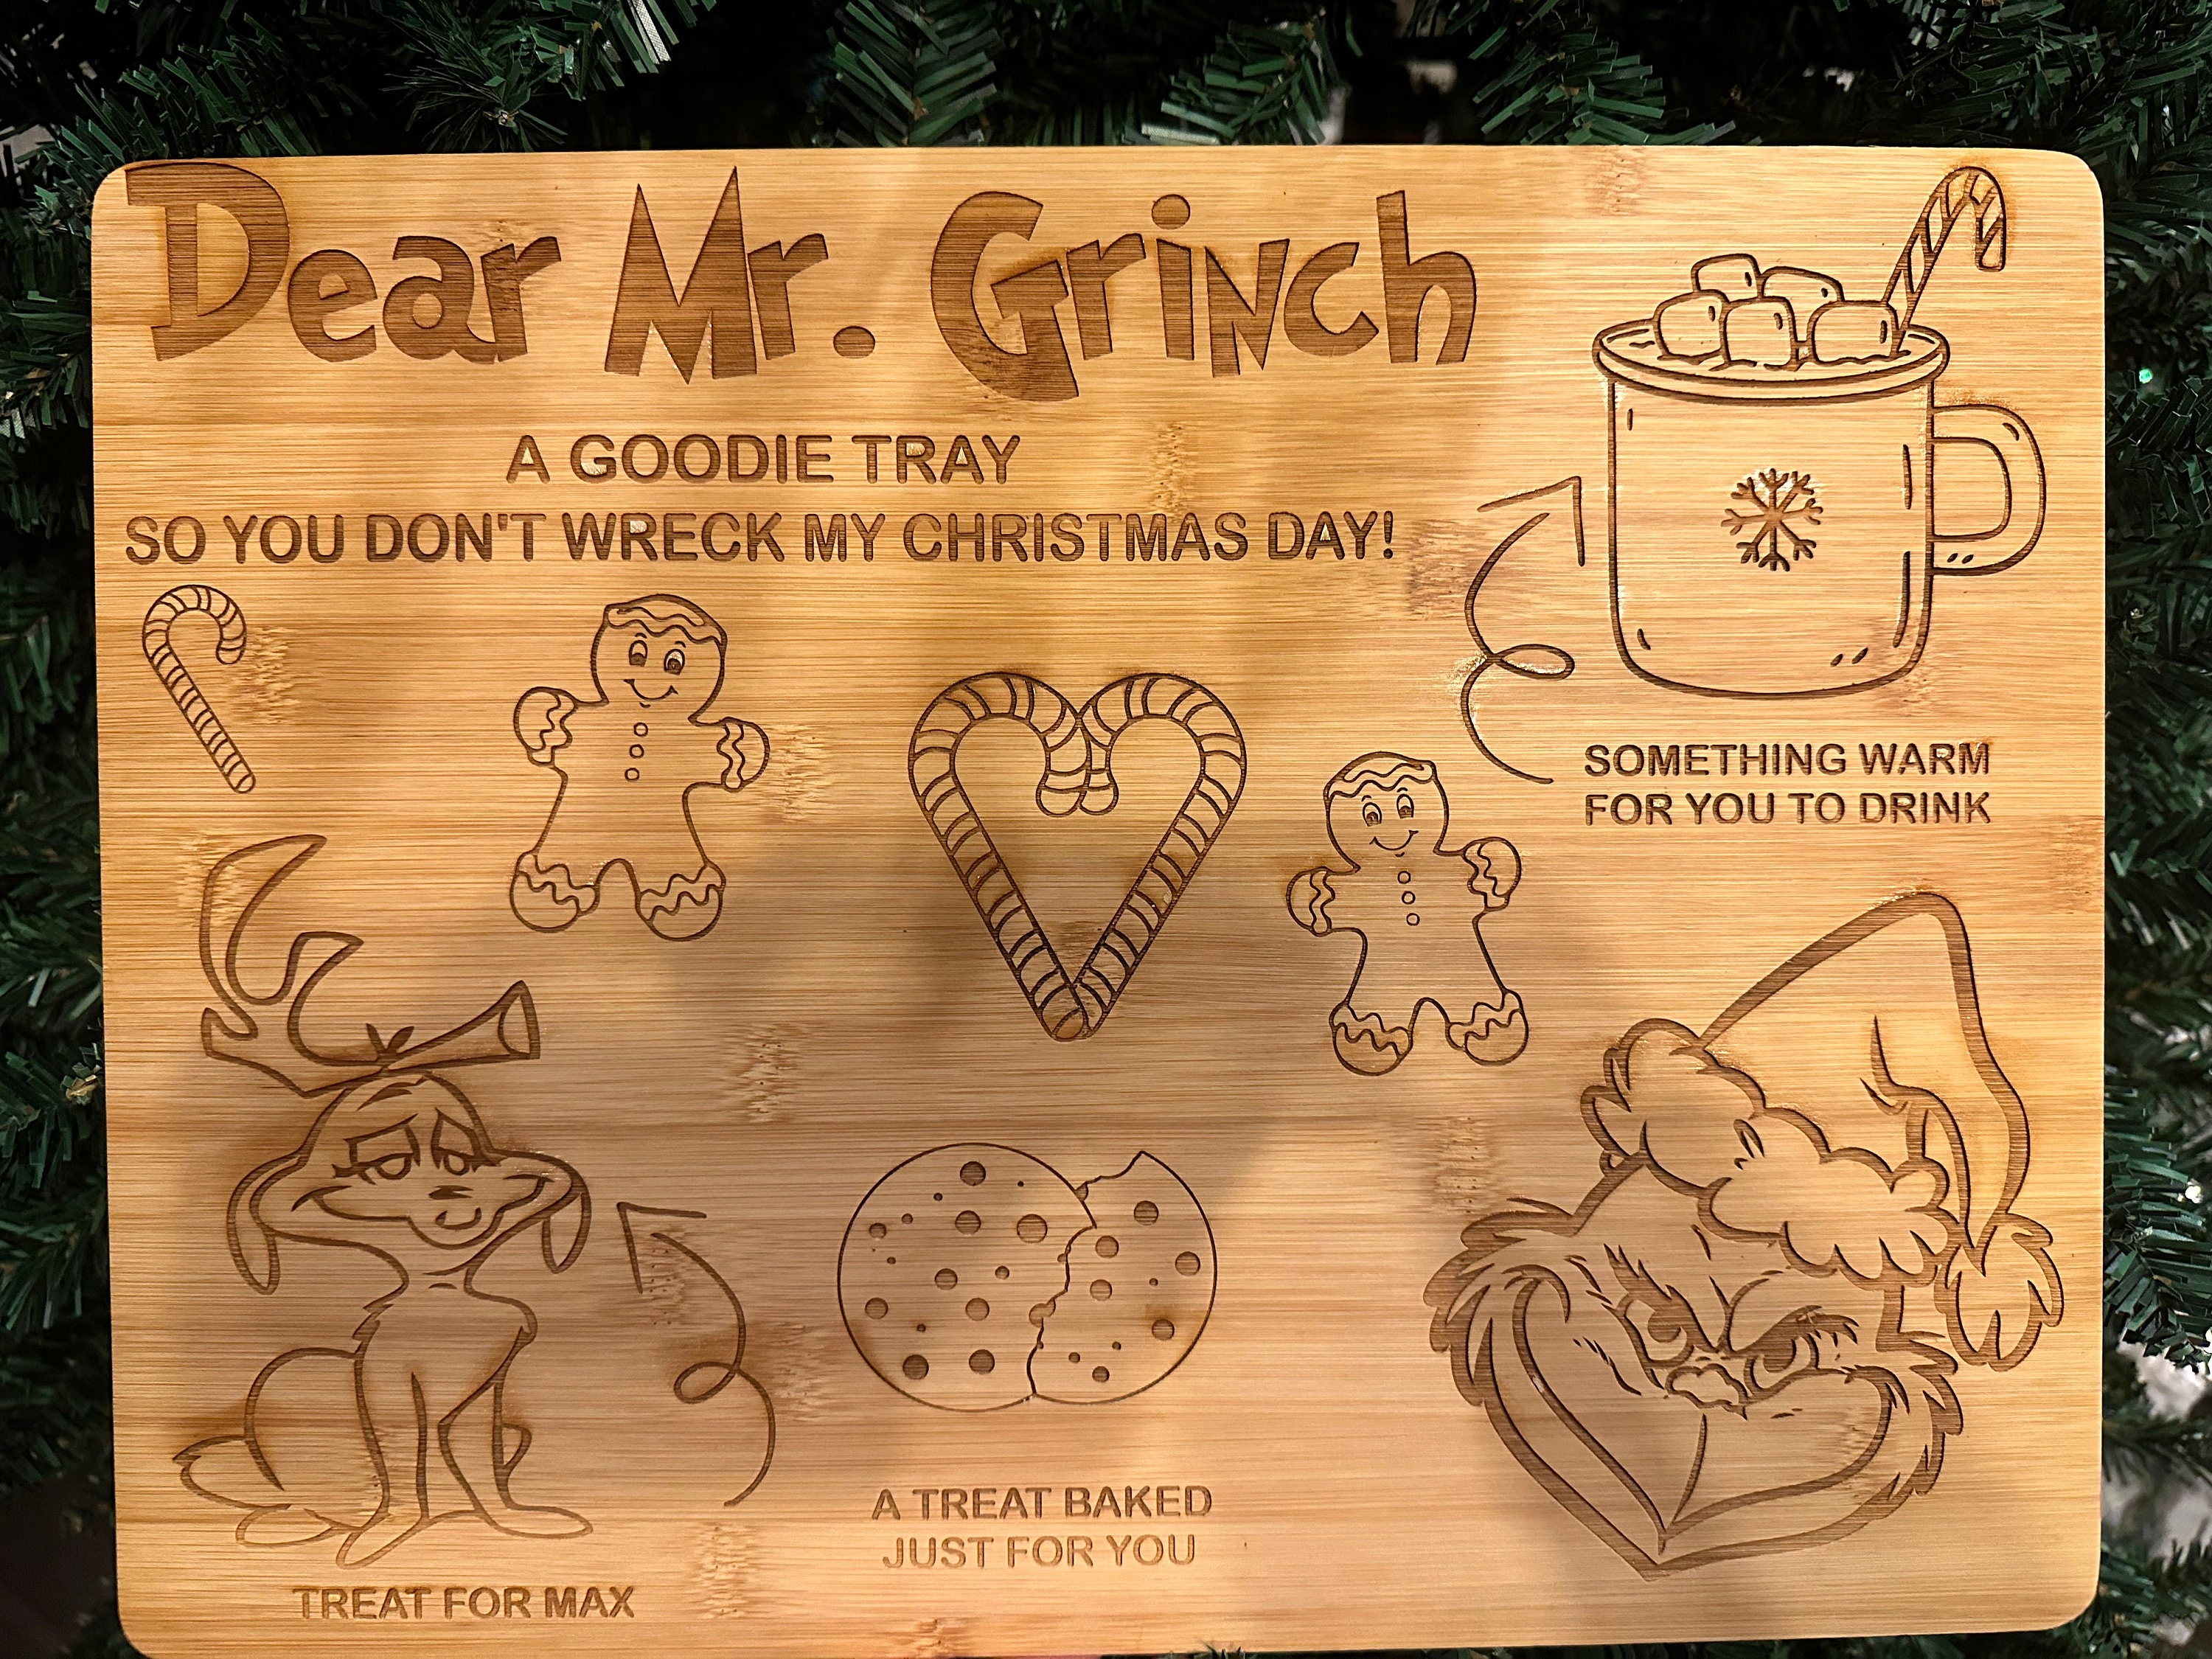 Any 2 GRINCH Stencils for Crafts Merry Christmas Stencils for